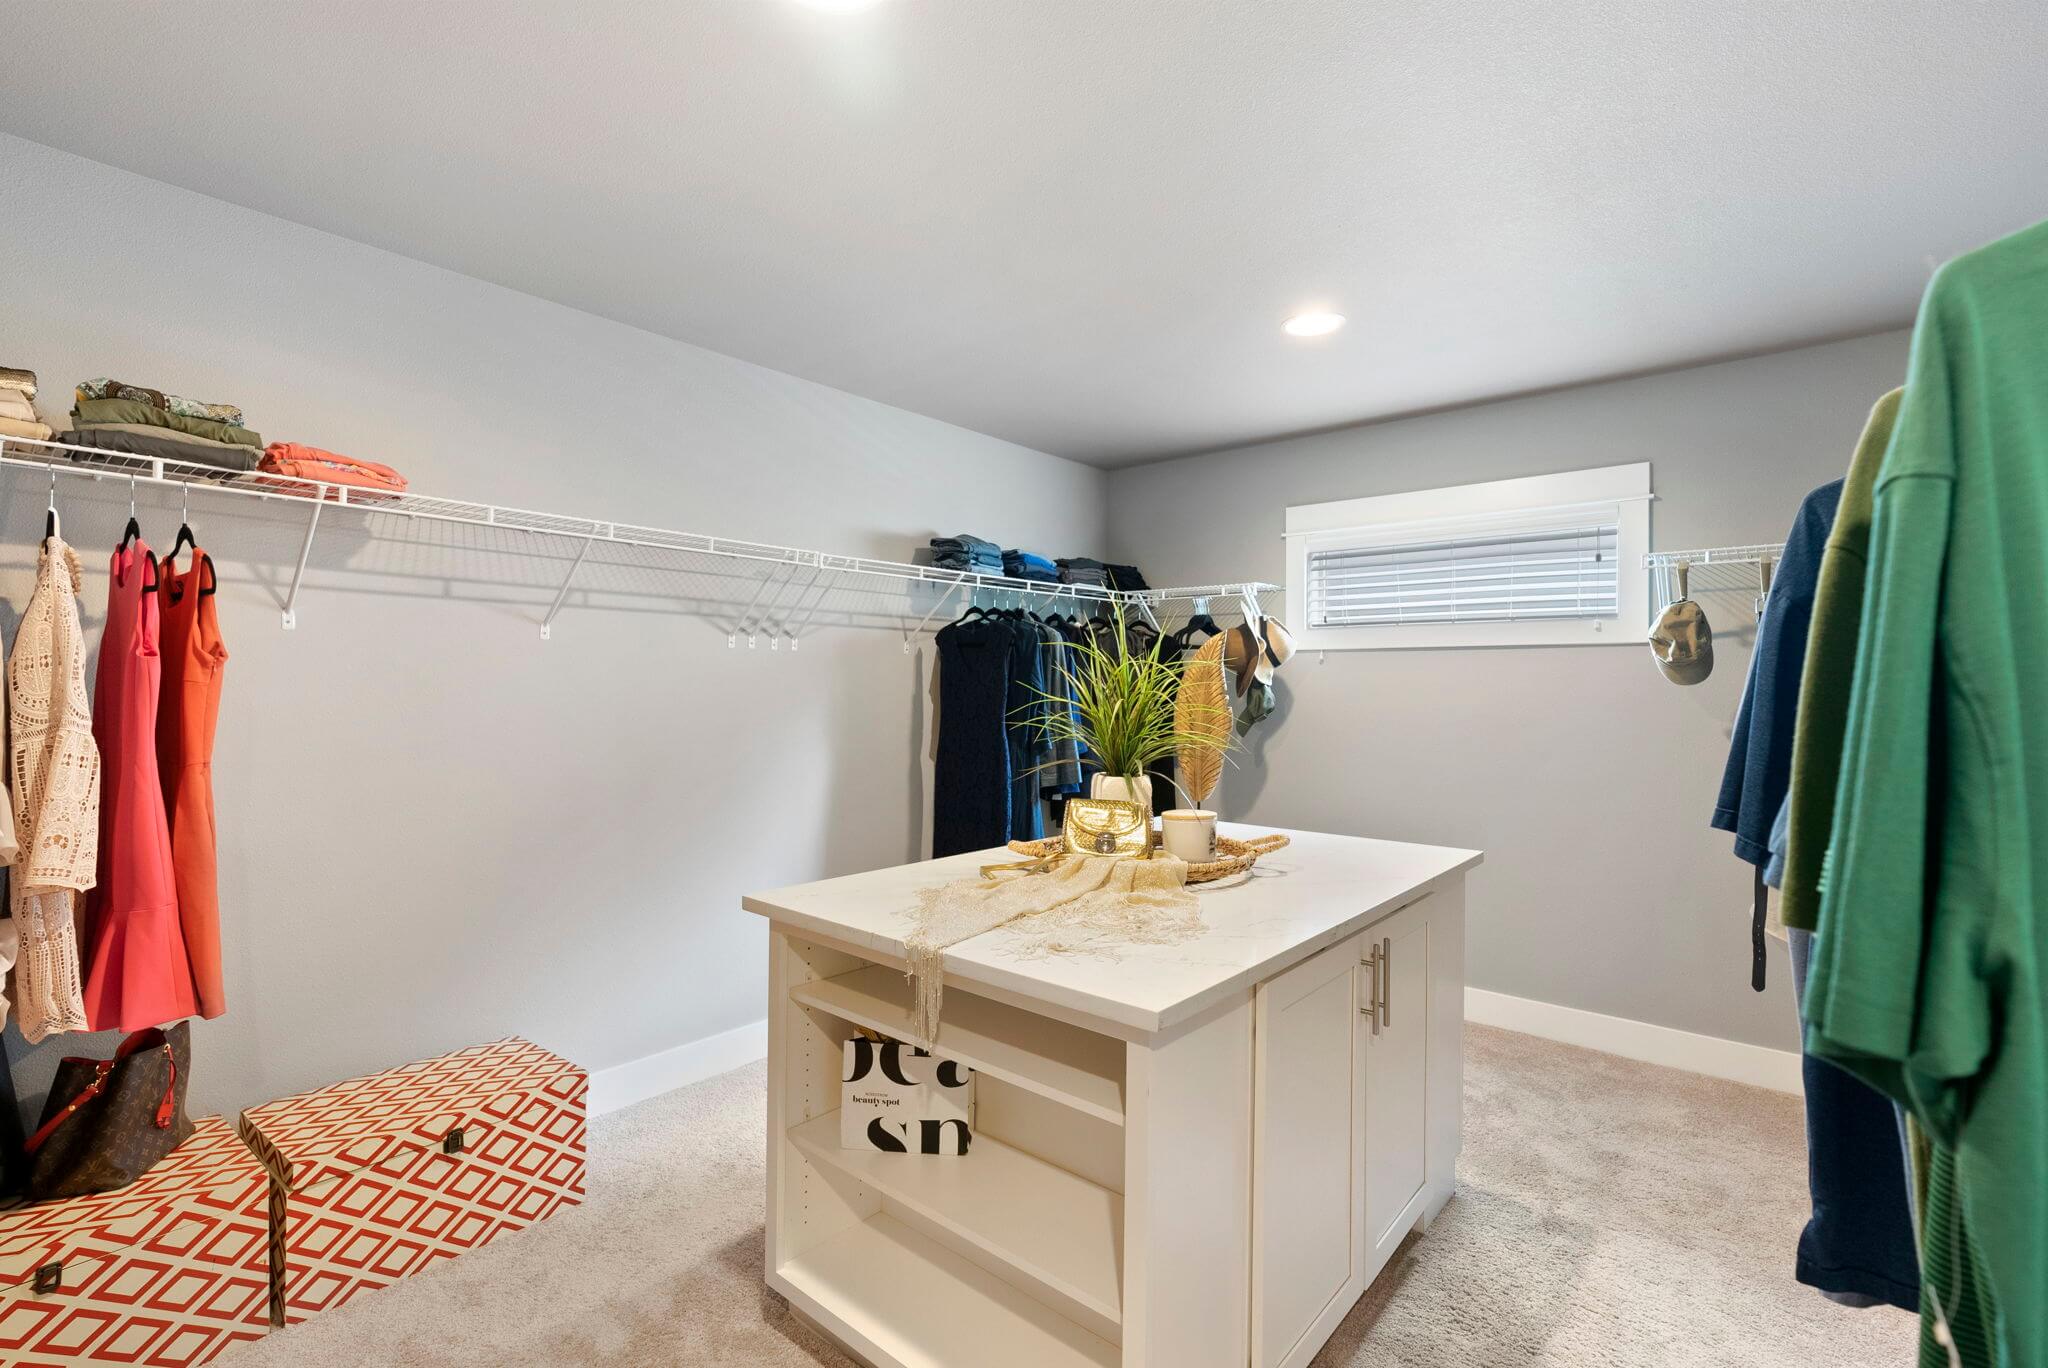 Primary suite features a large walk-in closet with built-in storage